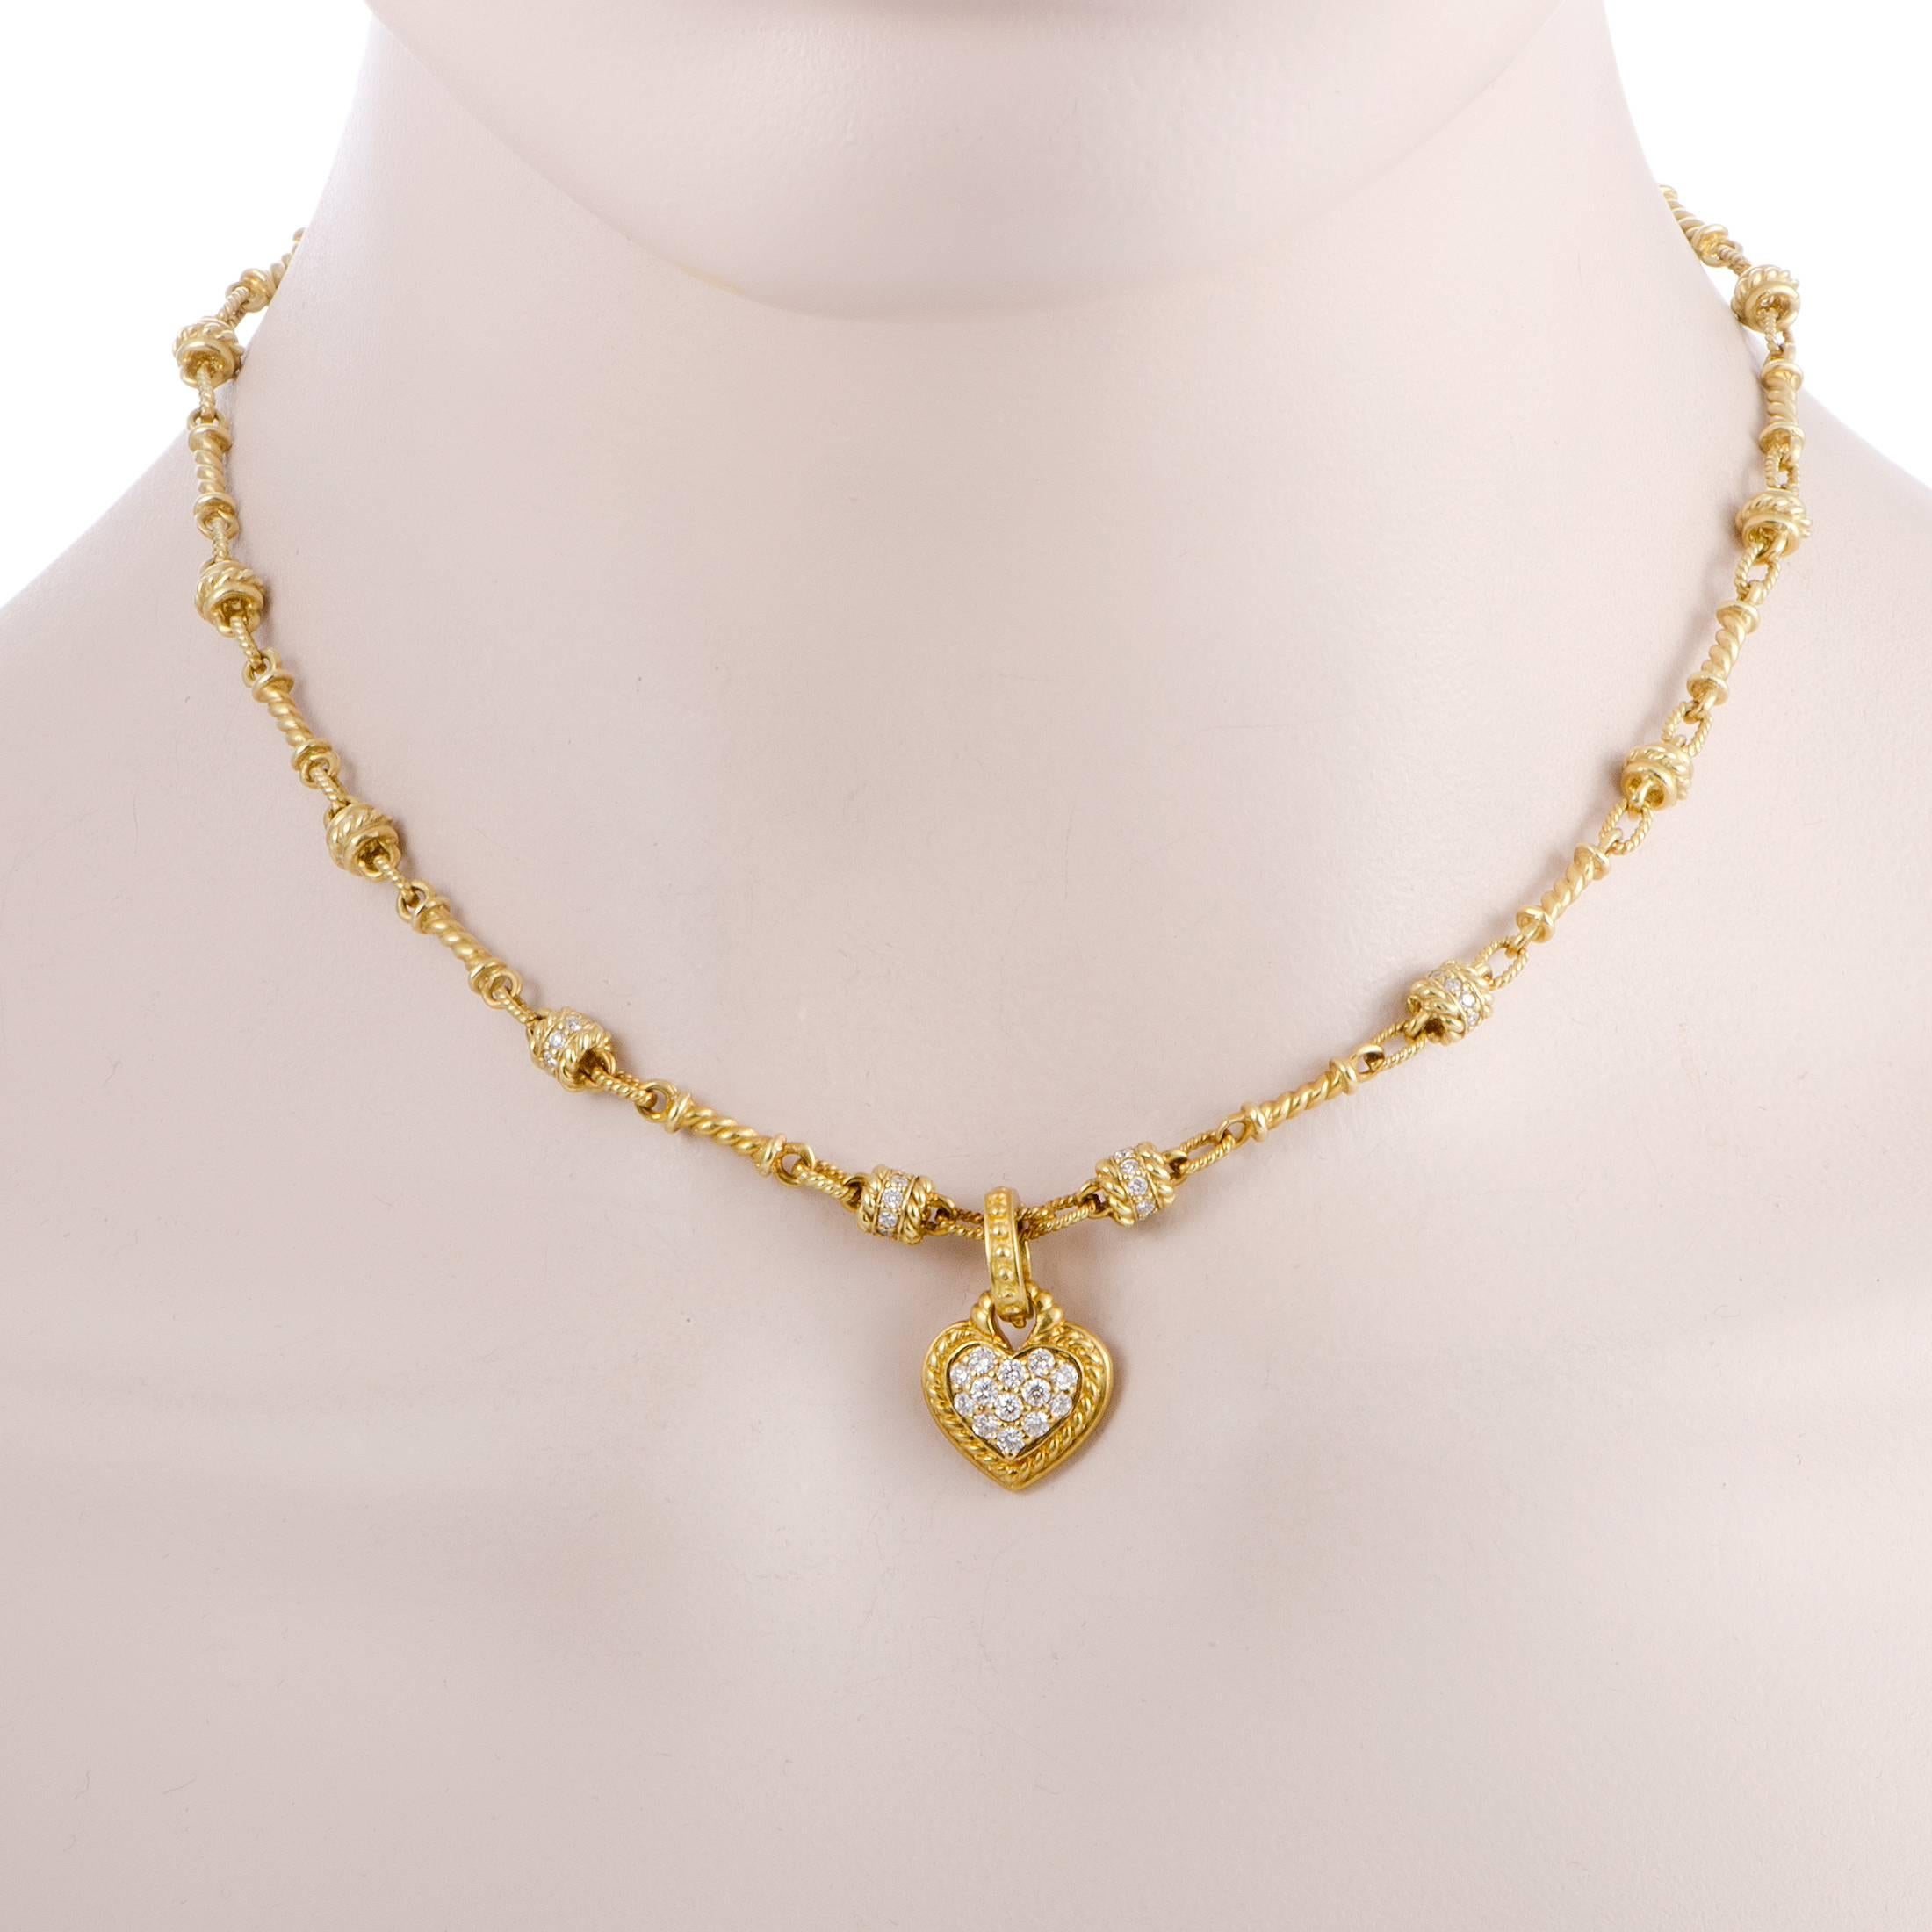 Wonderfully designed and exquisitely crafted, this delightful necklace offers charming, feminine allure thanks to the intricate details and the lovely heart pendant. The necklace – a Judith Ripka design – is made of 18K yellow gold and set with